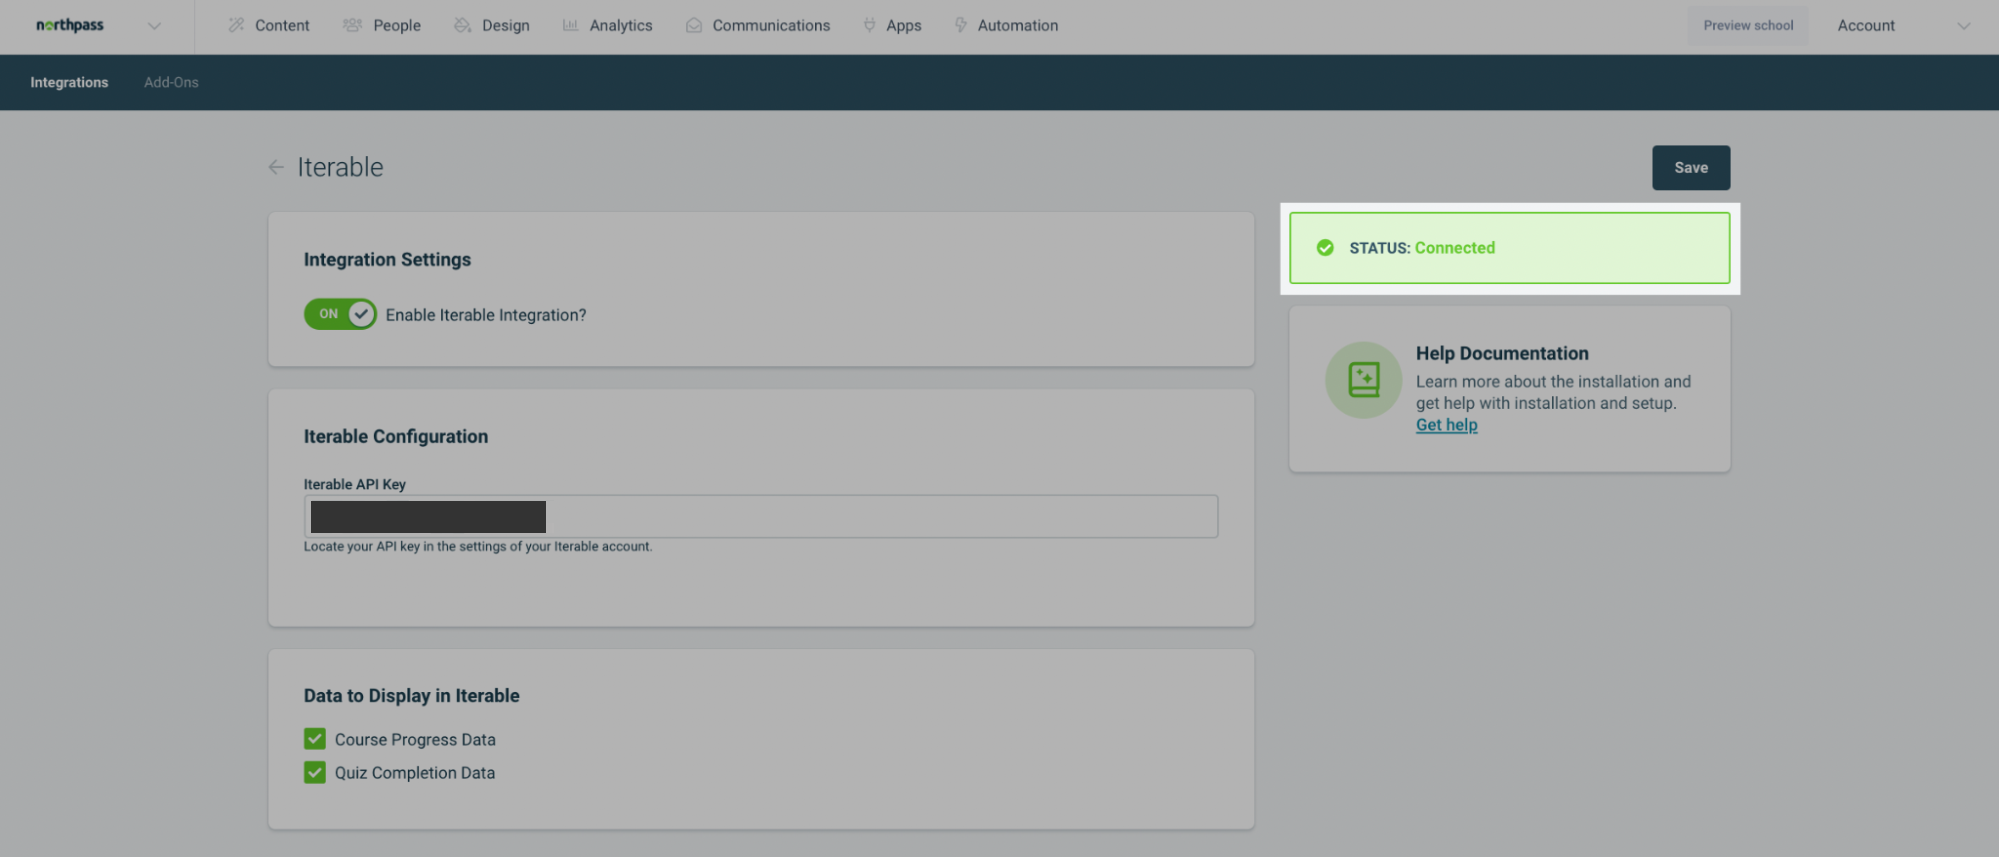 The Status box for the Iterable app in Northpass